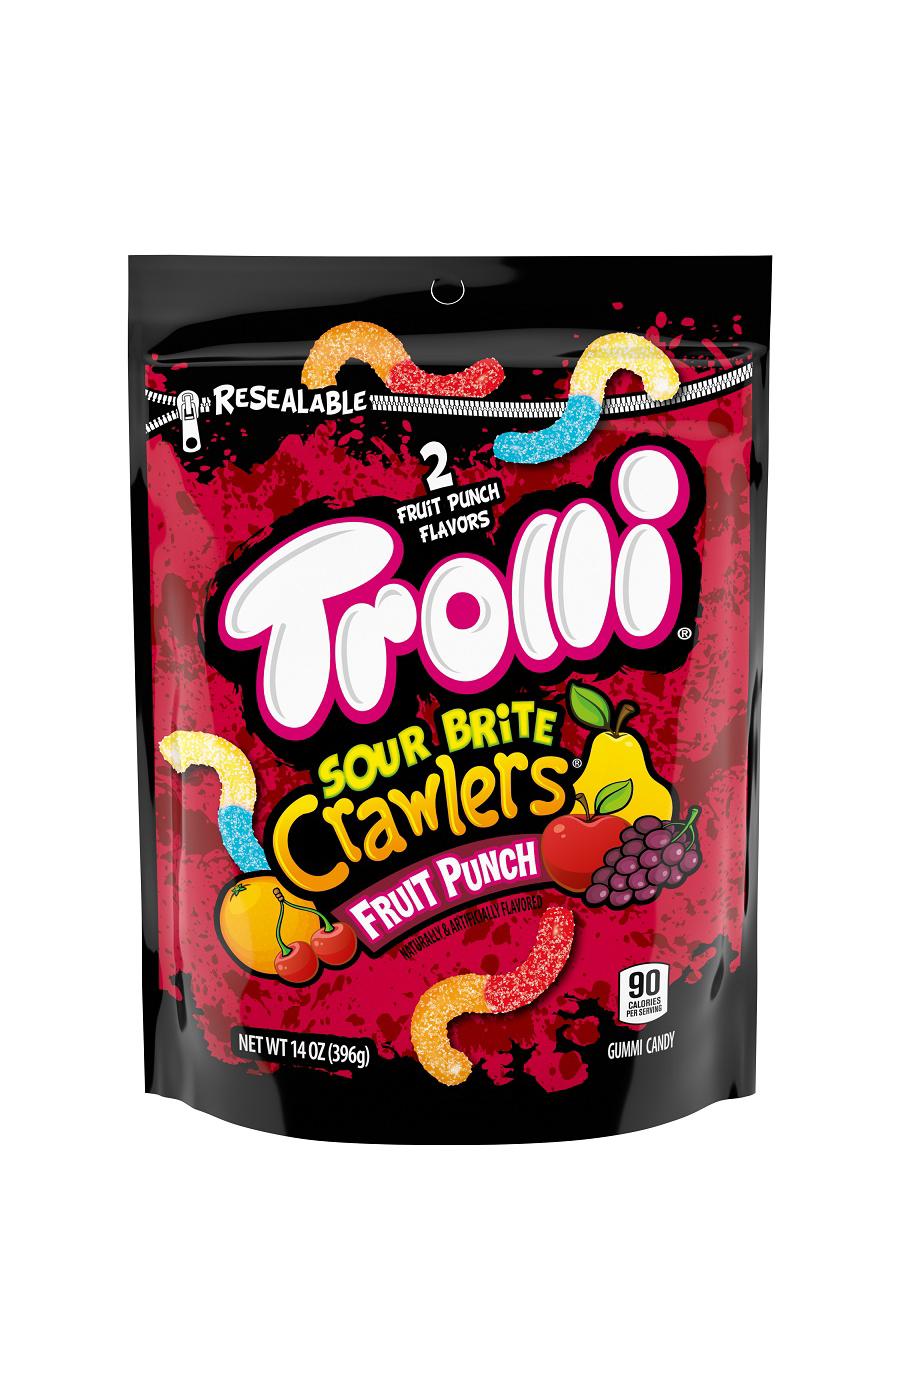 Trolli Fruit Punch Sour Brite Crawlers Candy; image 1 of 2